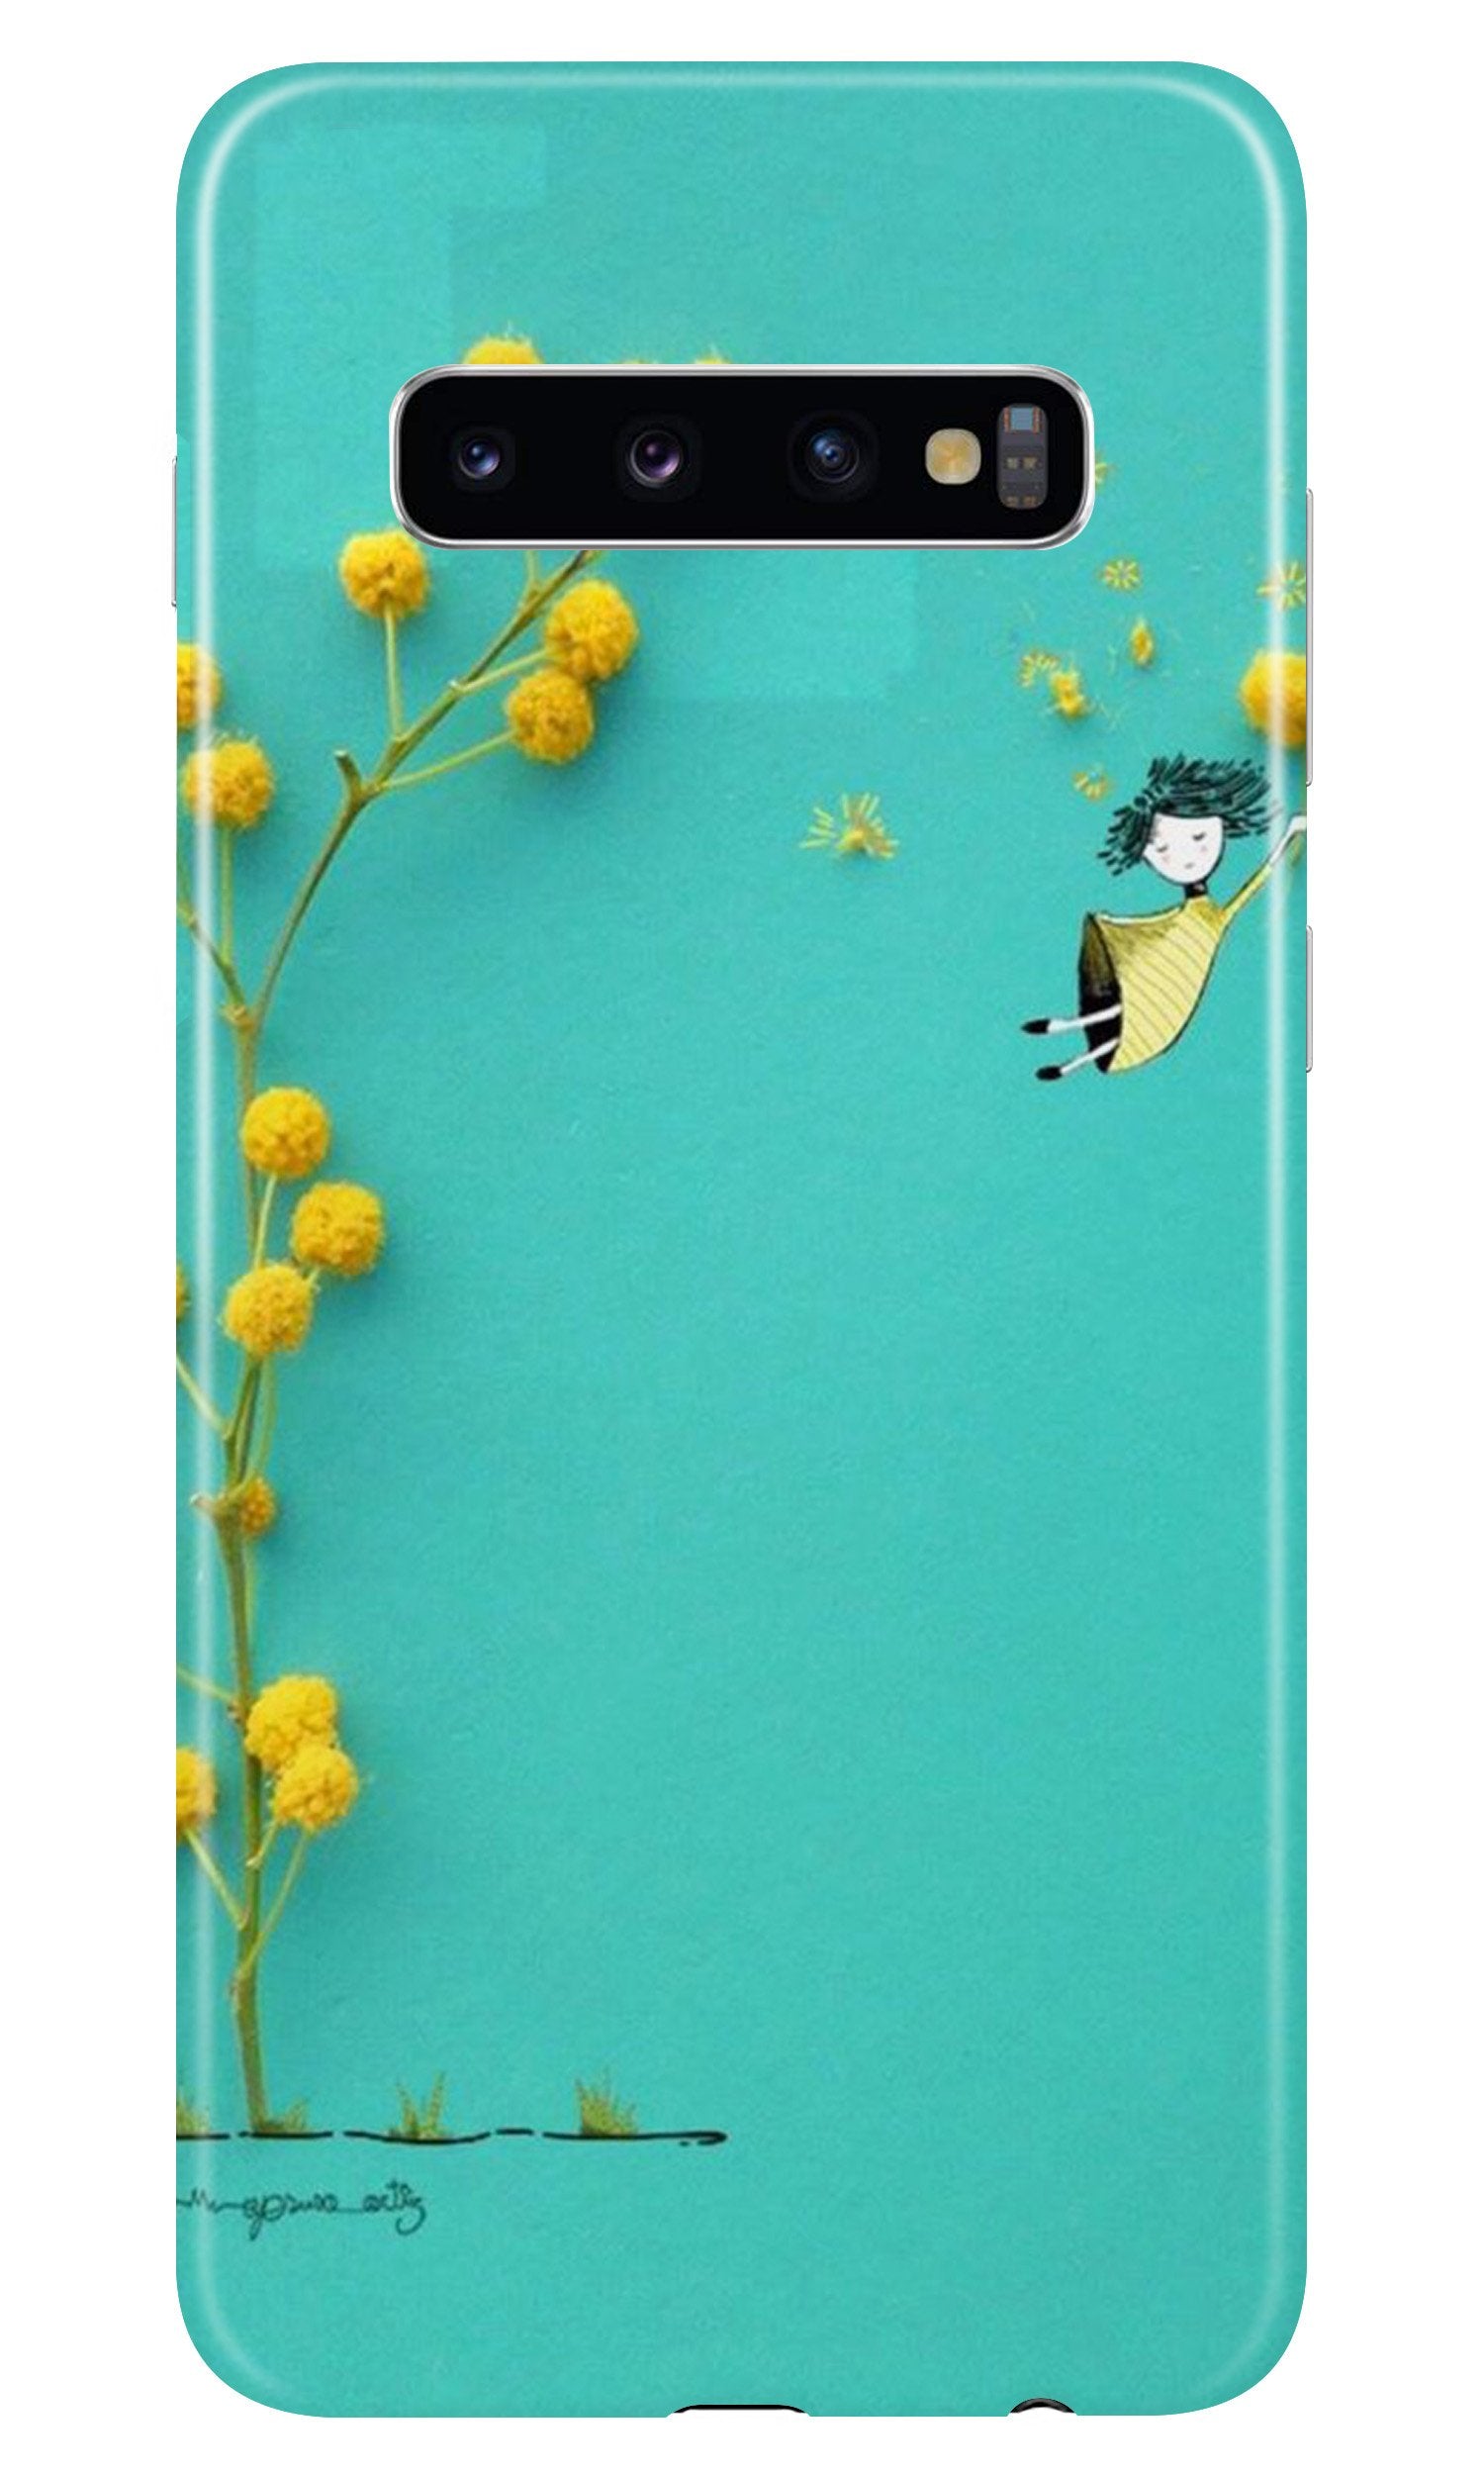 Flowers Girl Case for Samsung Galaxy S10 (Design No. 216)